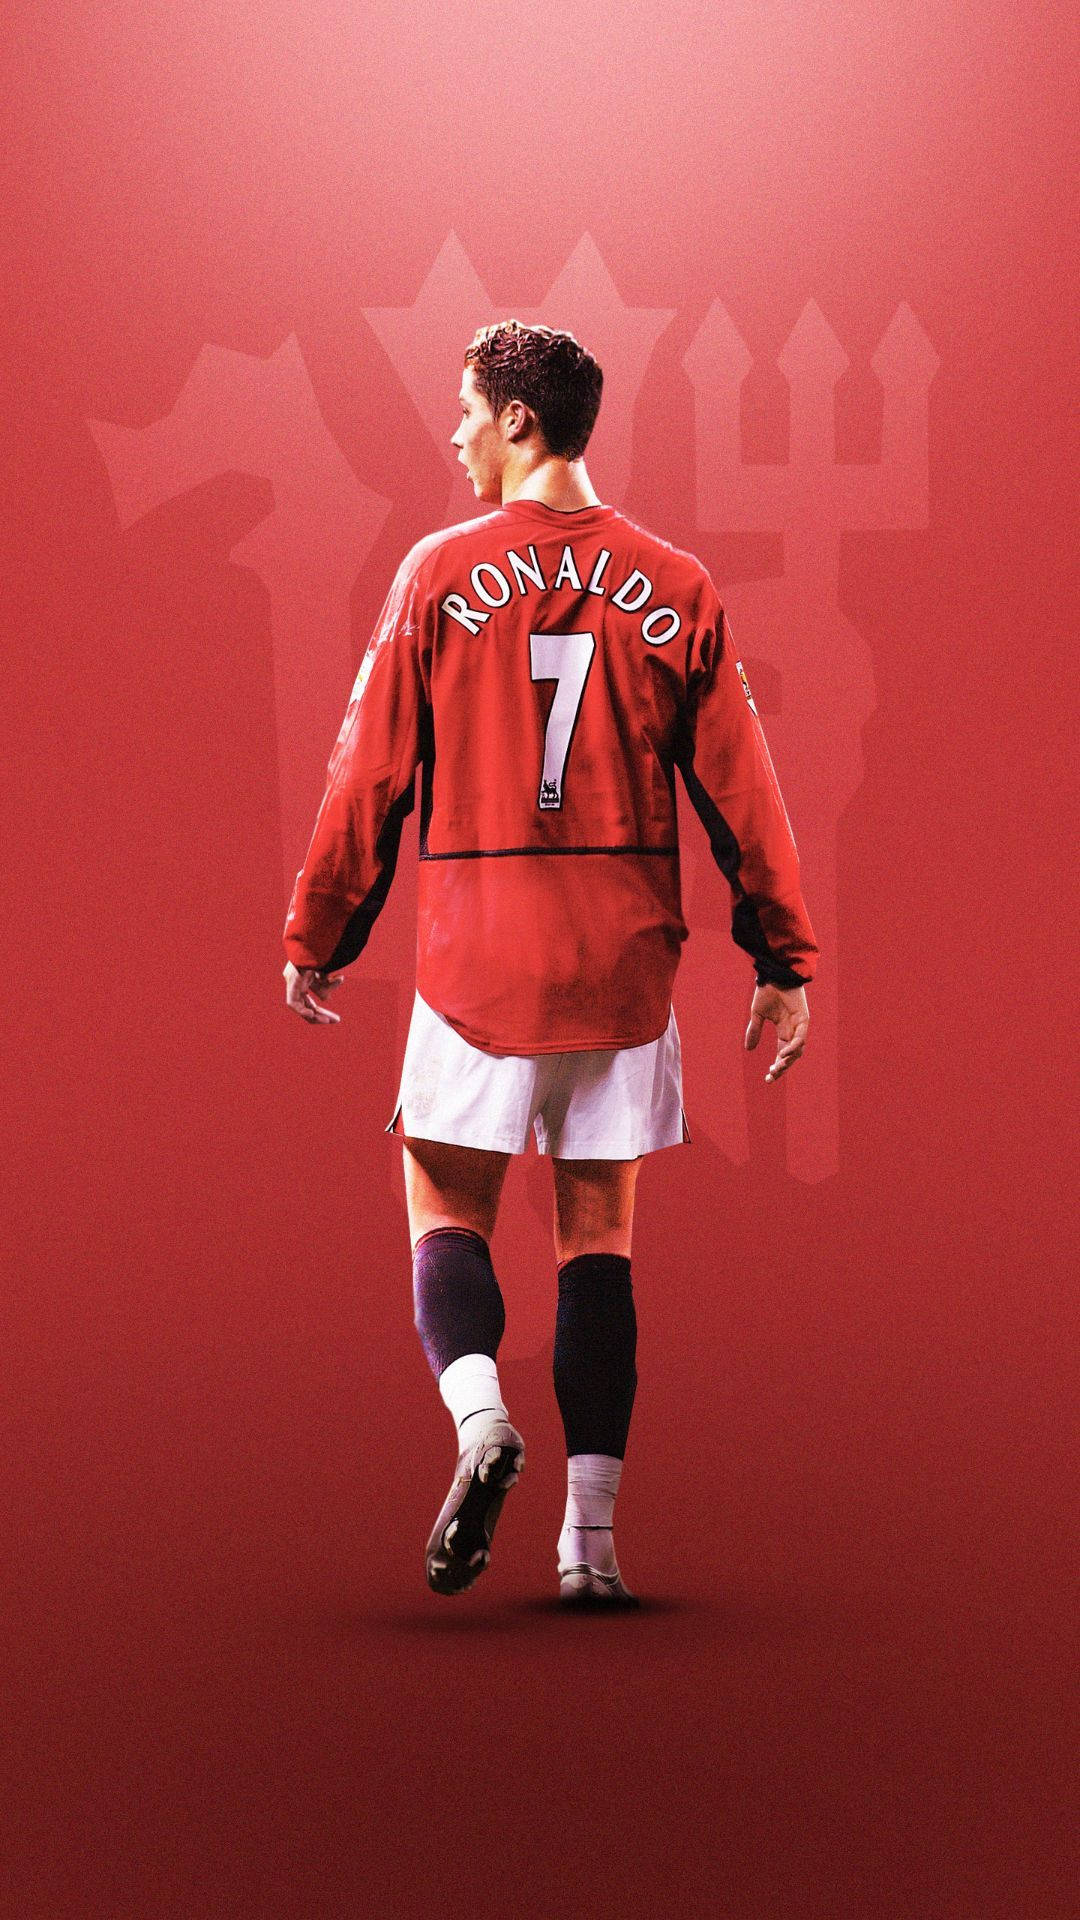 Free Cristiano Ronaldo Manchester United Wallpaper Downloads, [100+] Cristiano  Ronaldo Manchester United Wallpapers for FREE 